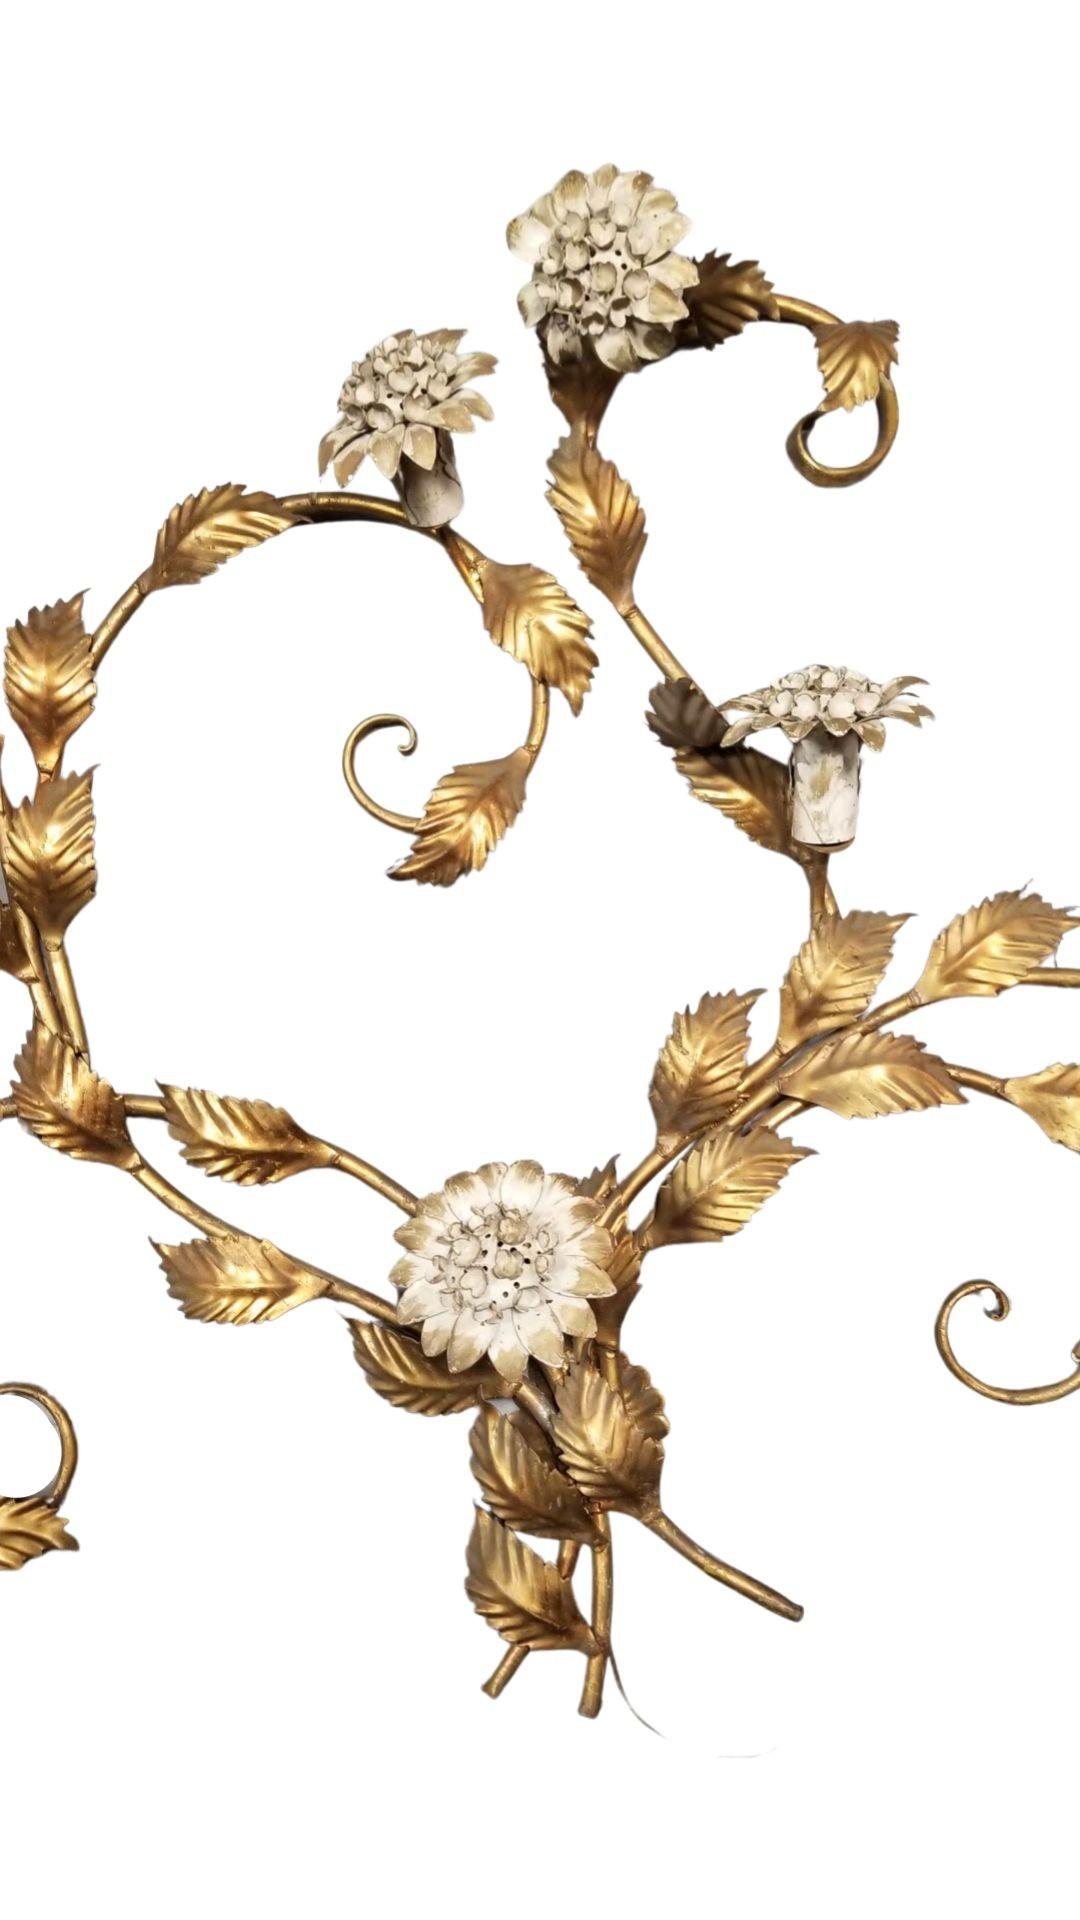 Mid-century era Tole wall sculpture light up wall sconce in the form of curling vines in brass enameled white illuminated flowers. Each flower is on a hinge for easy bulb replacement. Flowers lay forward when hung on a wall.

A stunning Italian